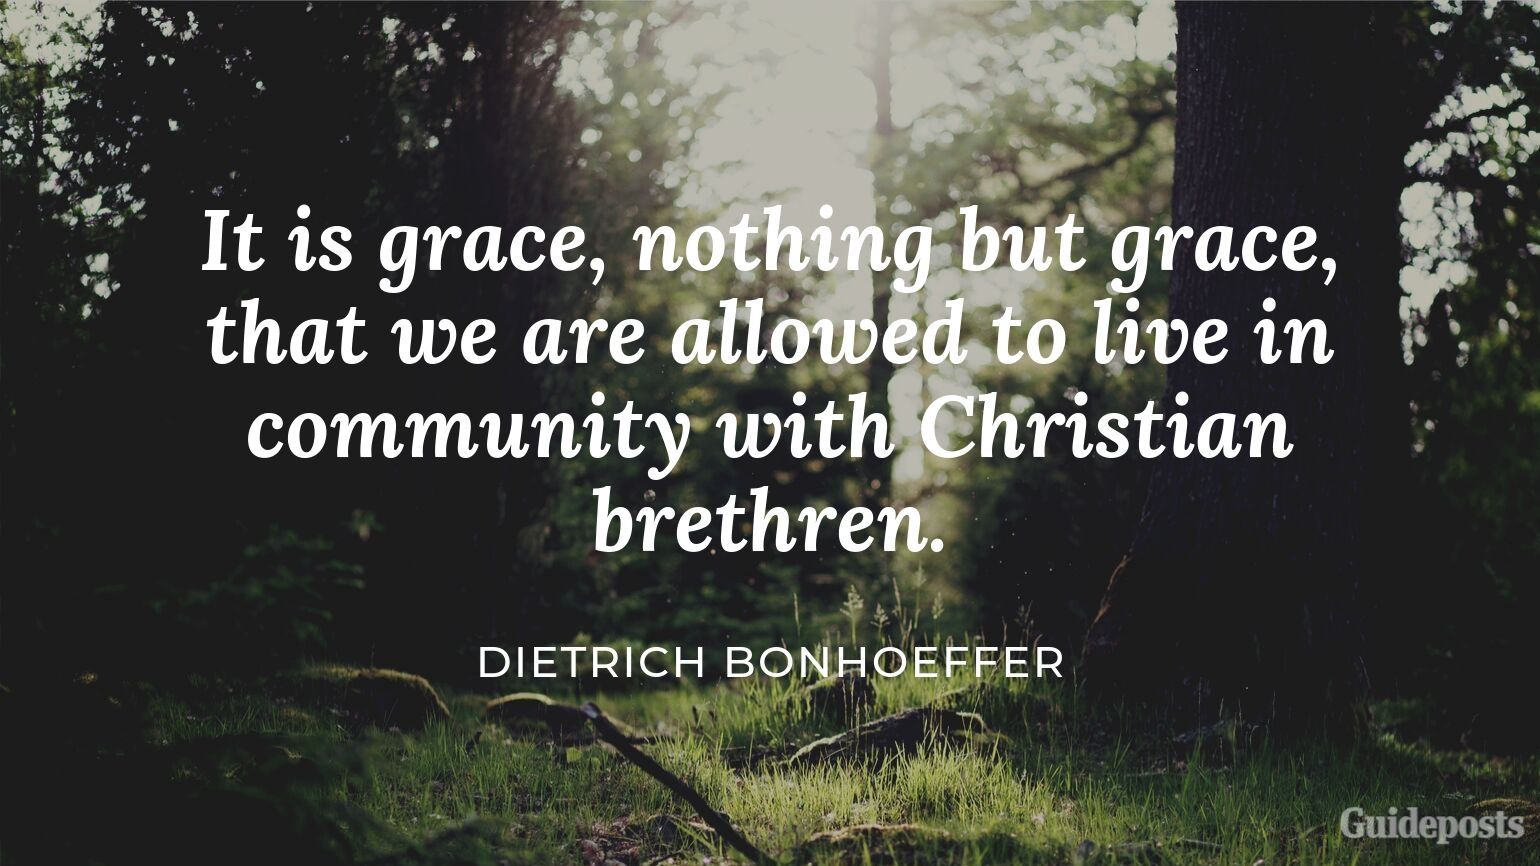 7 Inspiring Quotes from Dietrich Bonhoeffer German Pastor "It is grace, nothing but grace, that we are allowed to live in community with Christian brethren." Inspiration Inspirational Stories of Faith